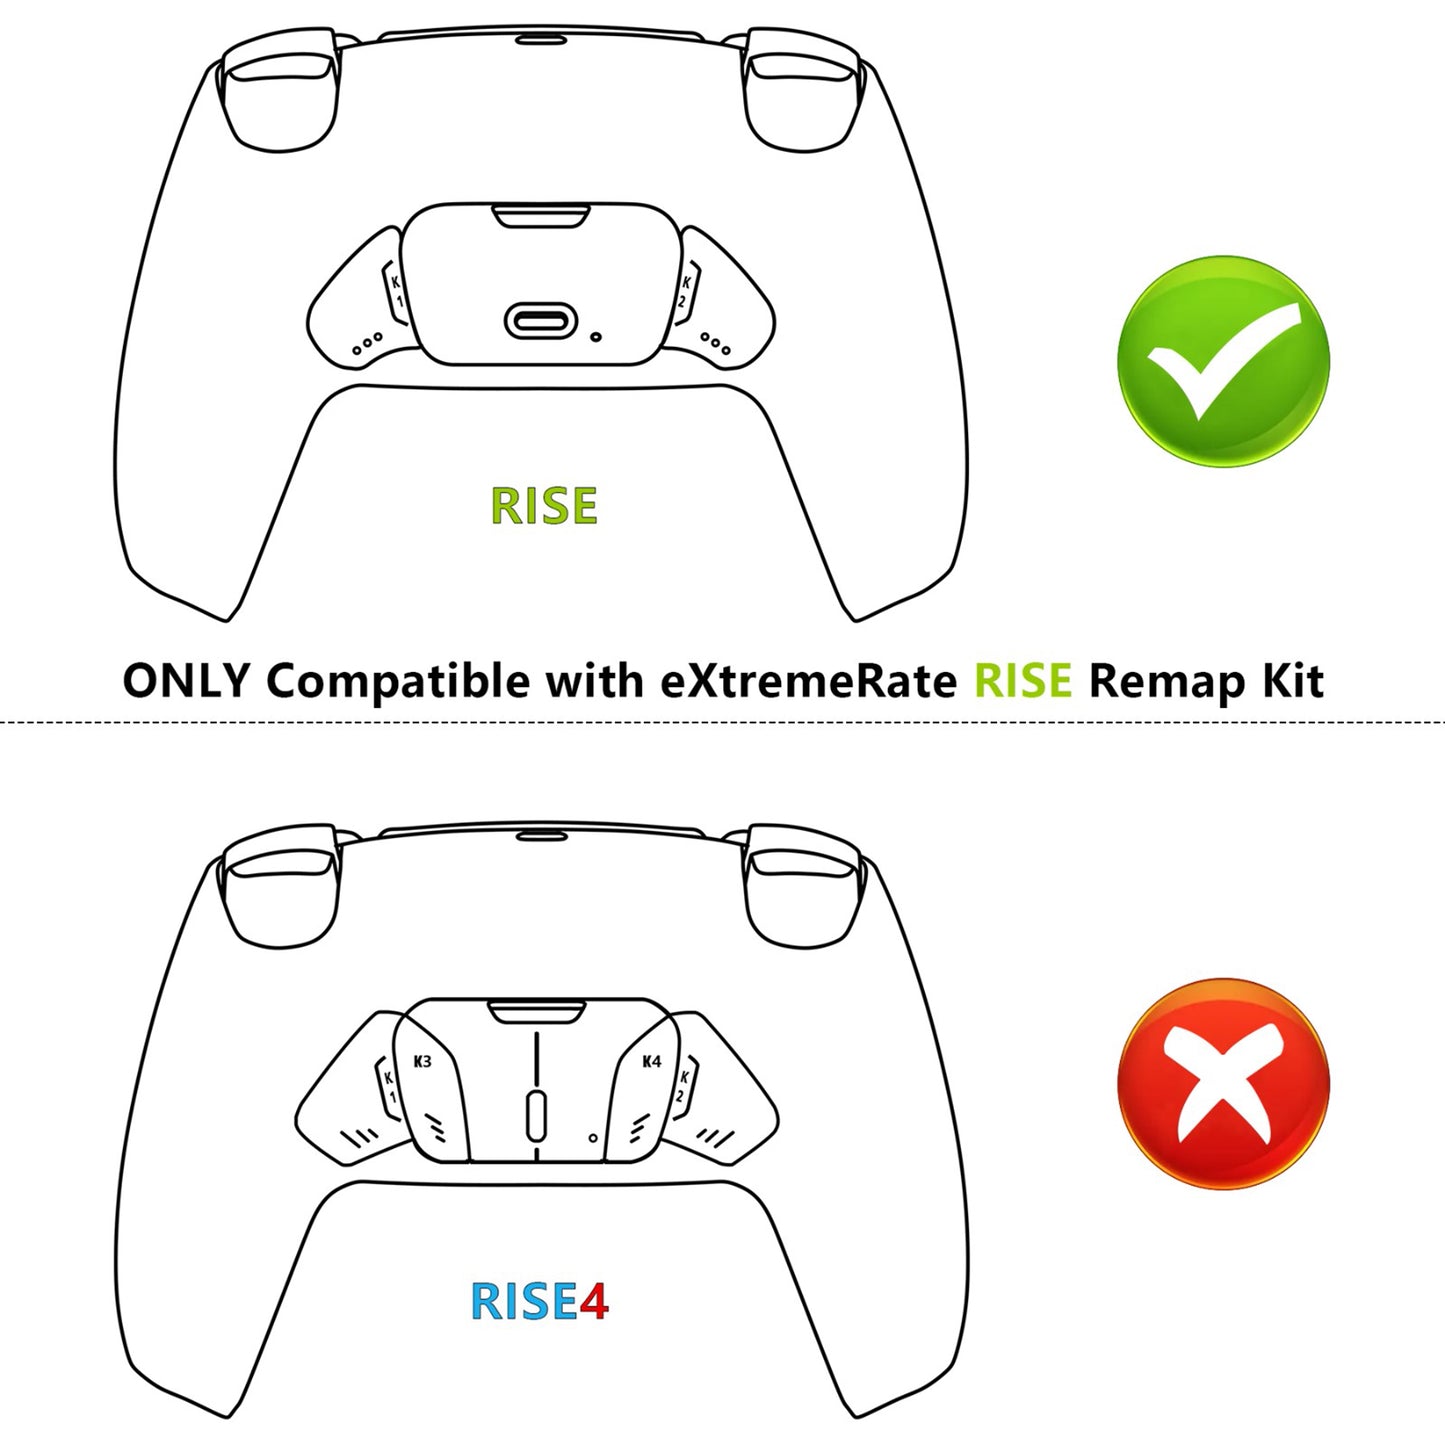 eXtremeRate Replacement Redesigned K1 K2 Back Buttons for eXtremerate RISE Remap Kit, Compatible with PS5 Controller - Chameleon Purple Blue eXtremeRate